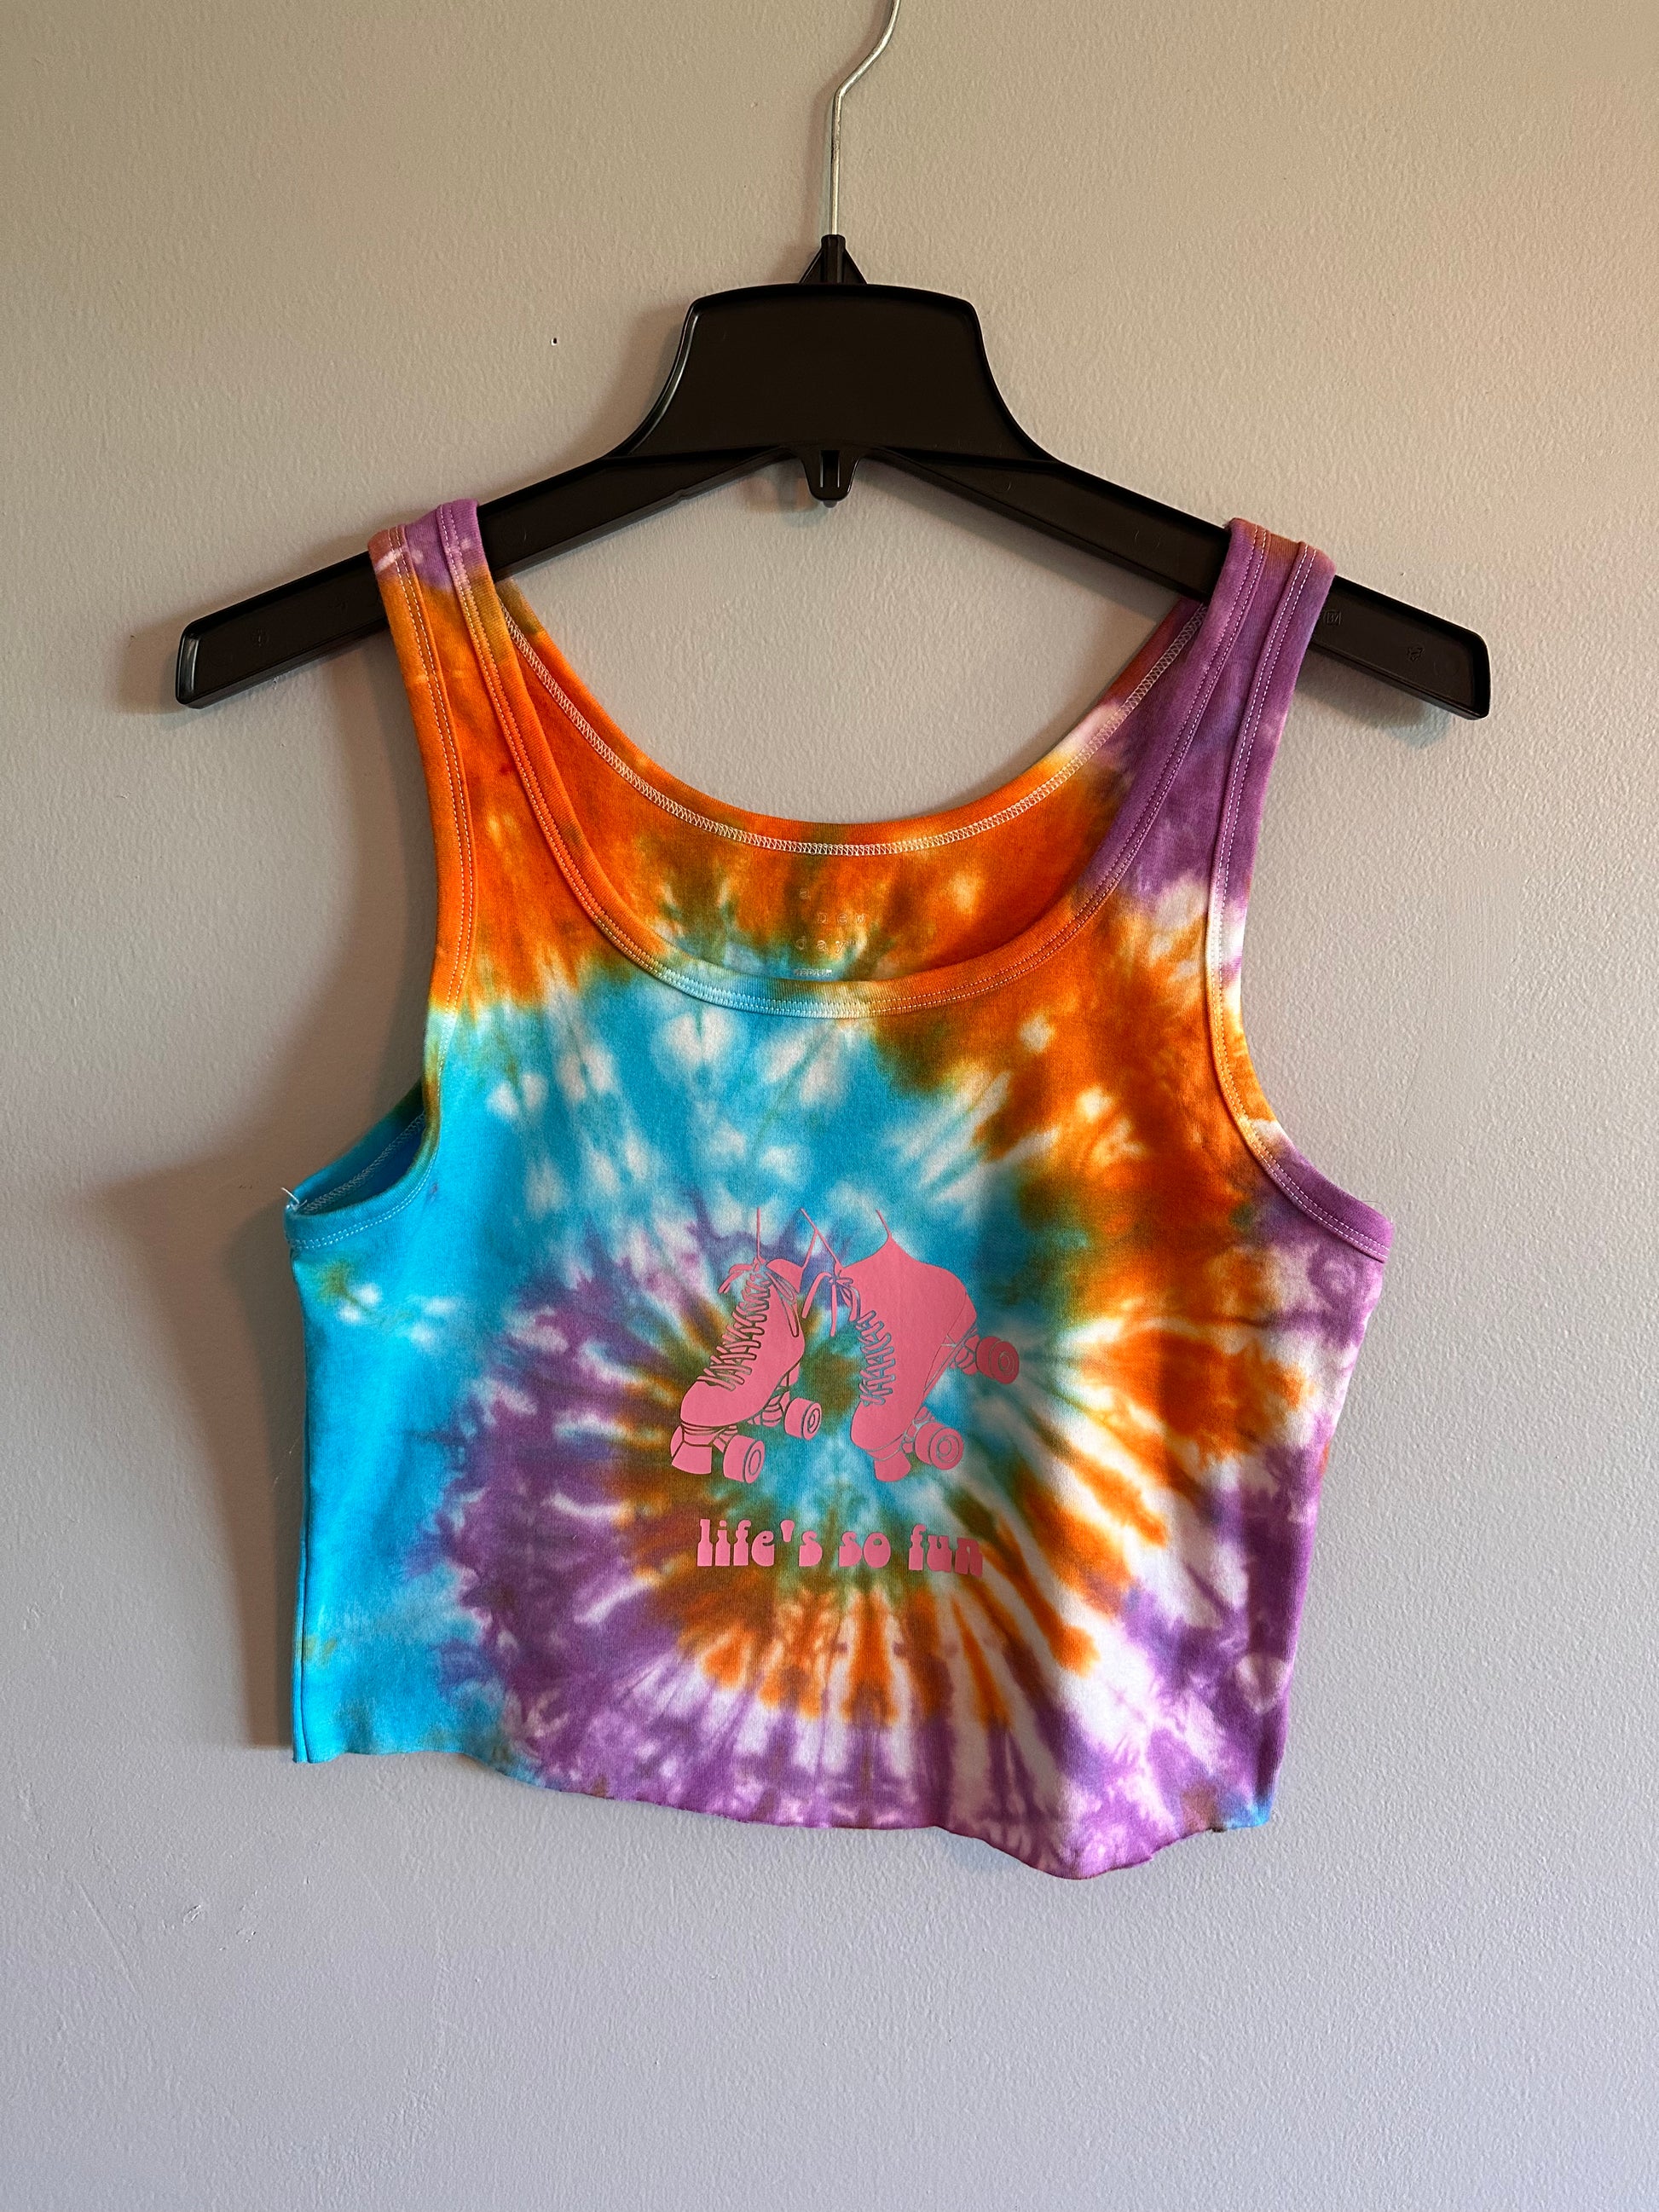 How To Dye Polyester: Easy and Awesome DIY with Video - Chas' Crazy  Creations